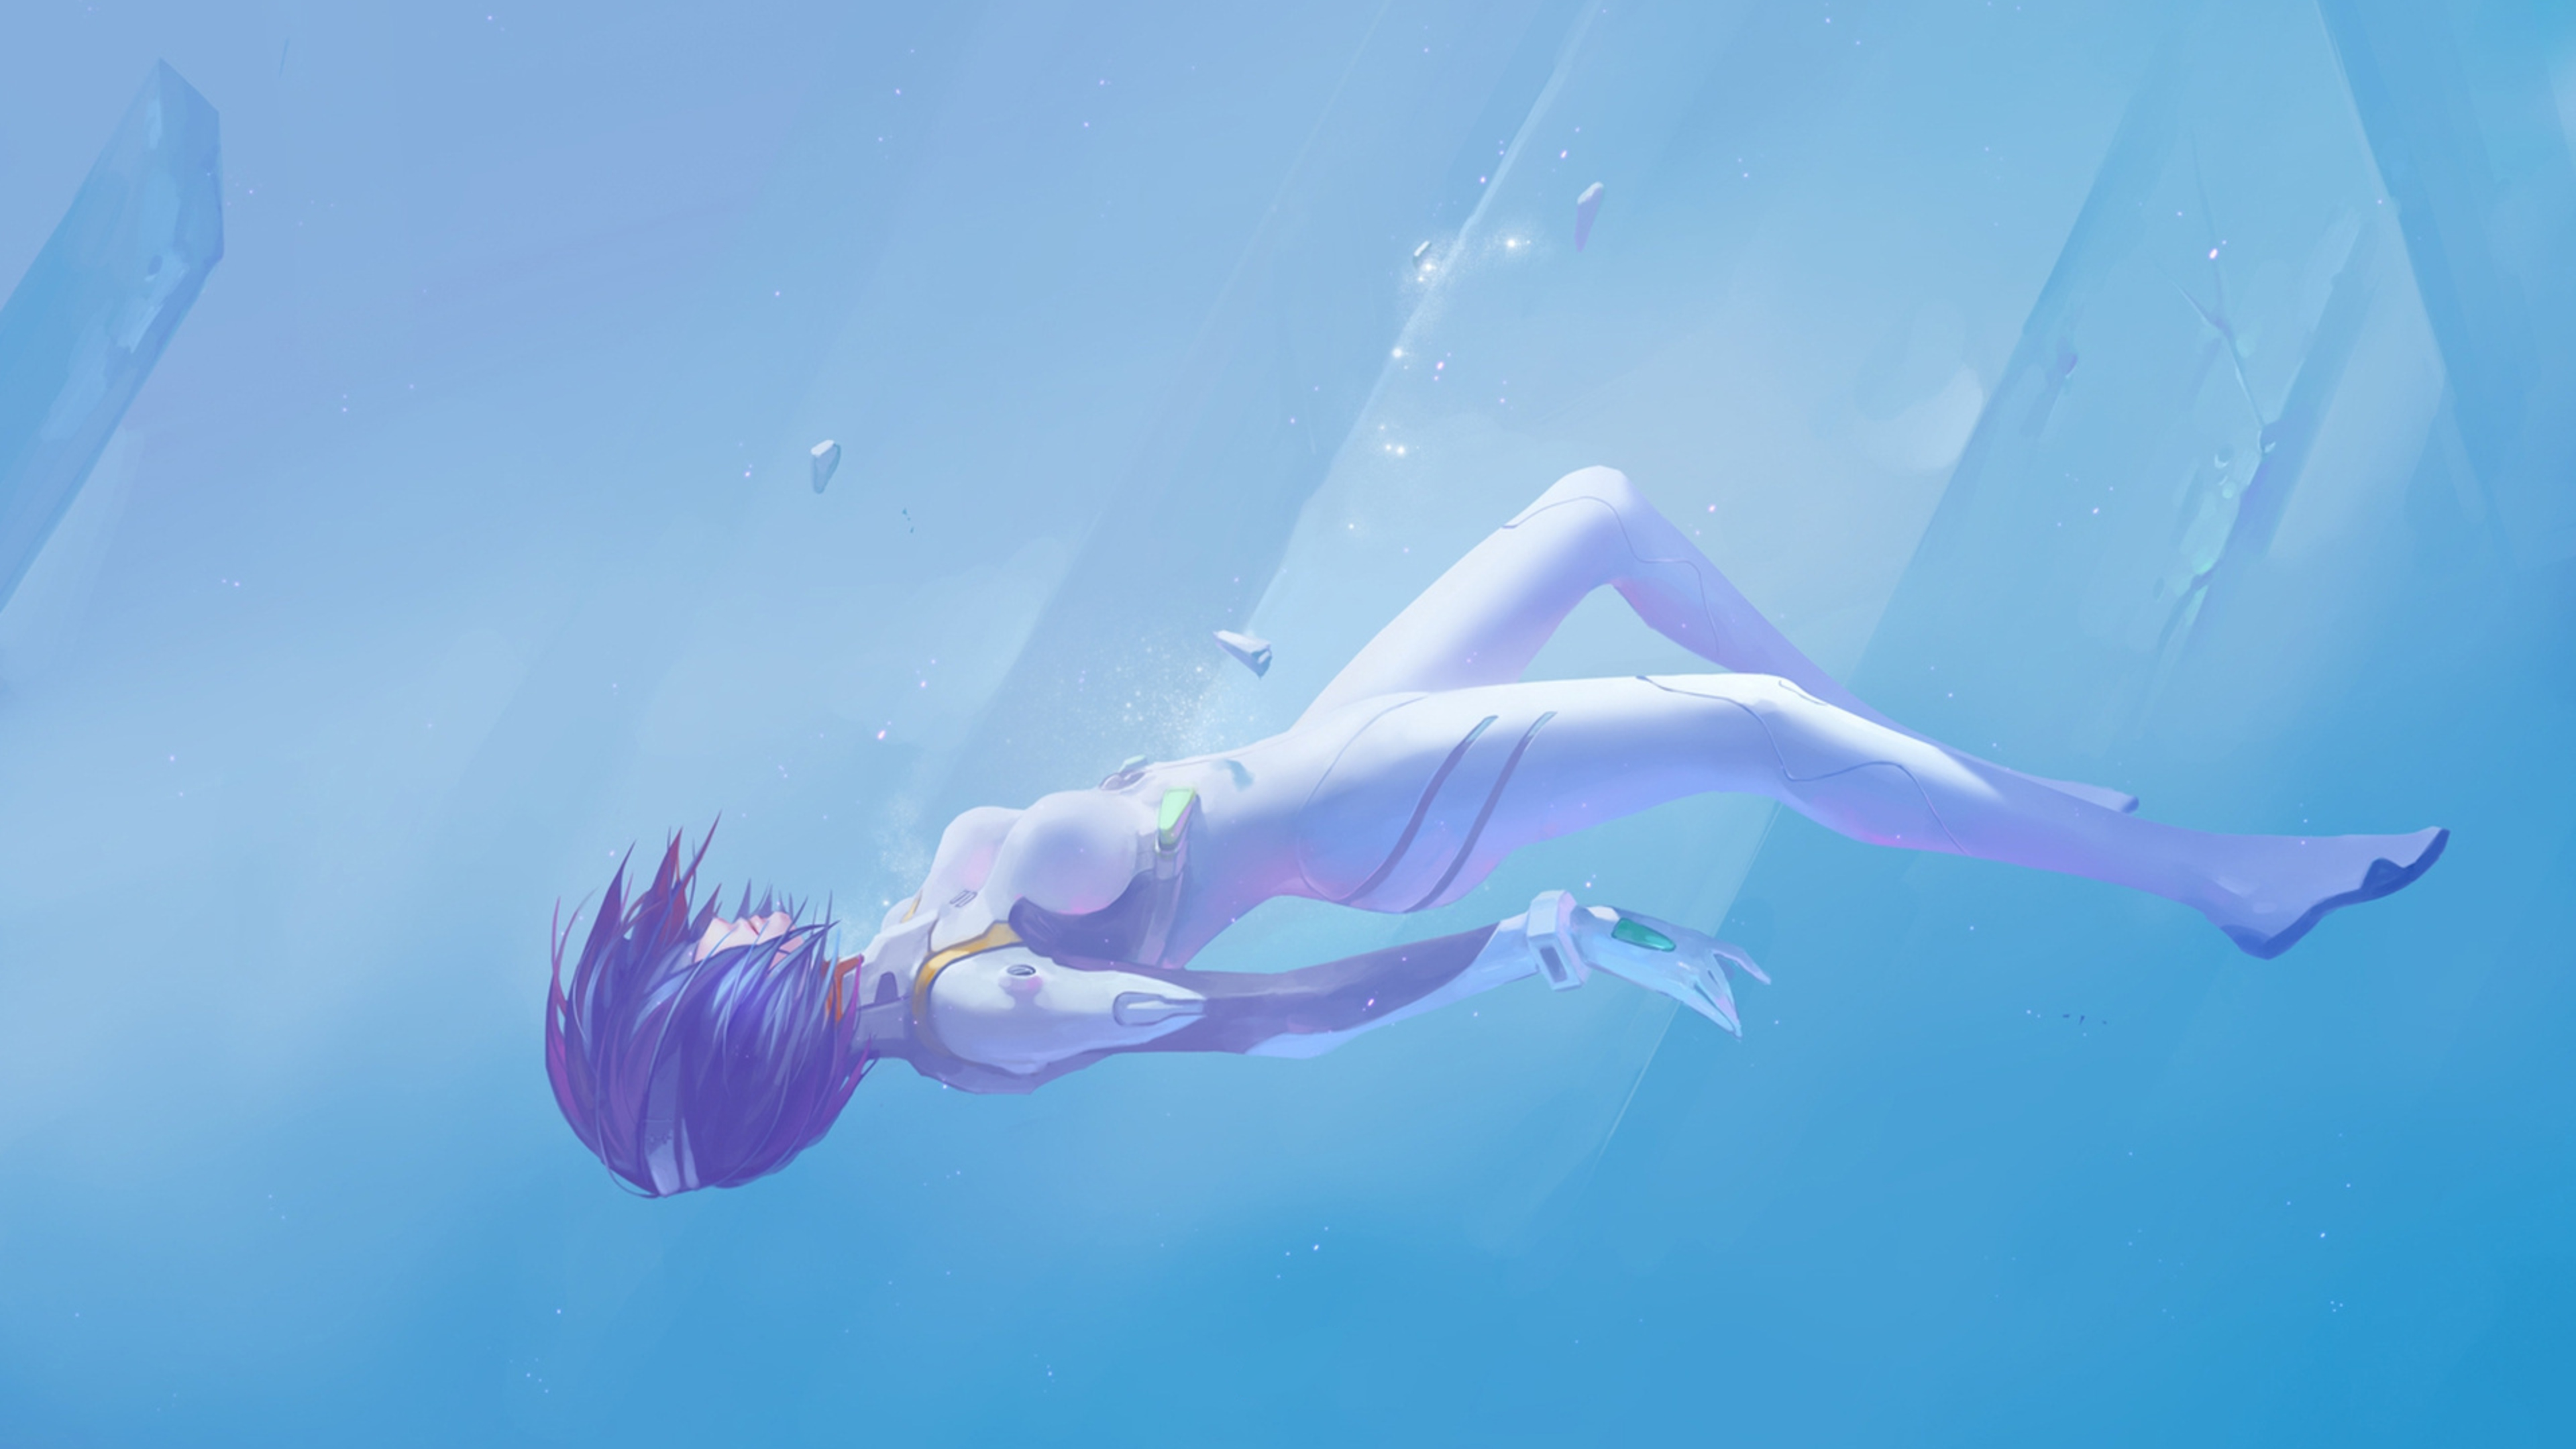 Wallpaper Anime Underwater Drowning, Rei Ayanami, Anime, Sleeve, Water, Background Free Image